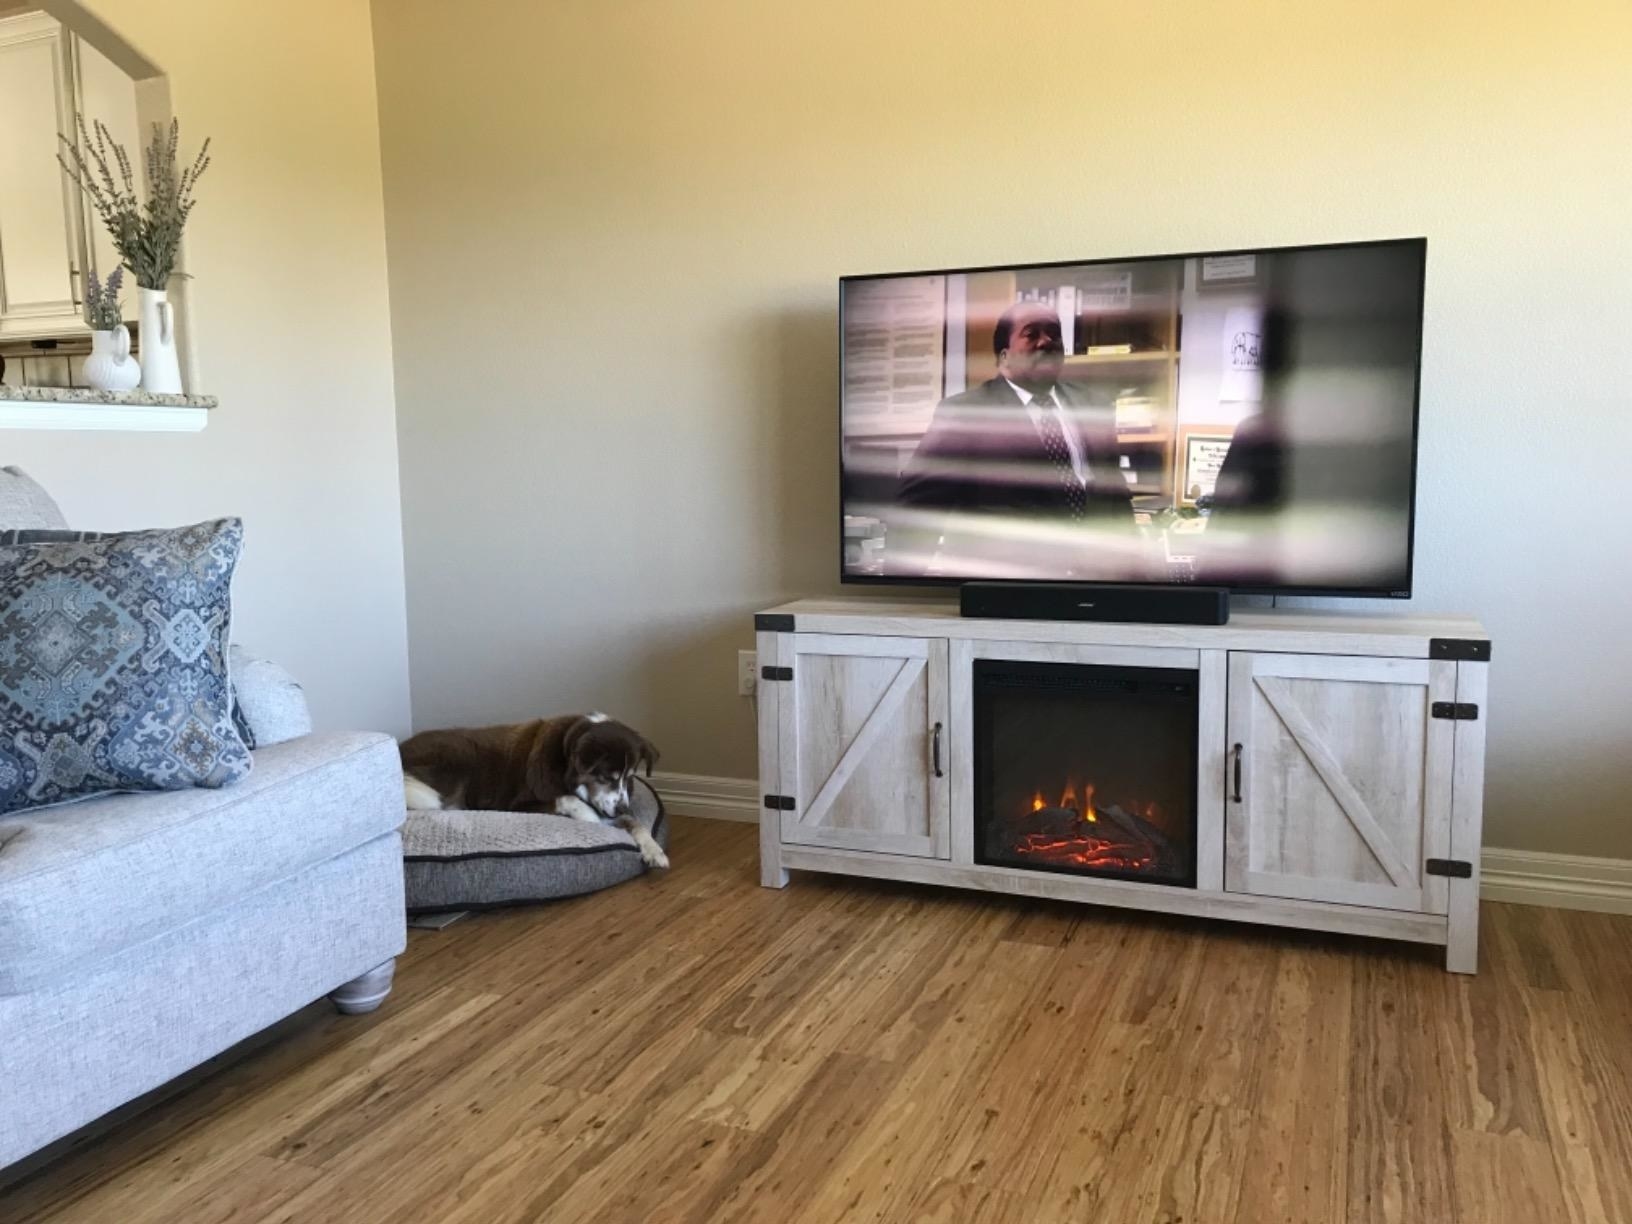 The TV stand with fireplace and solid doors